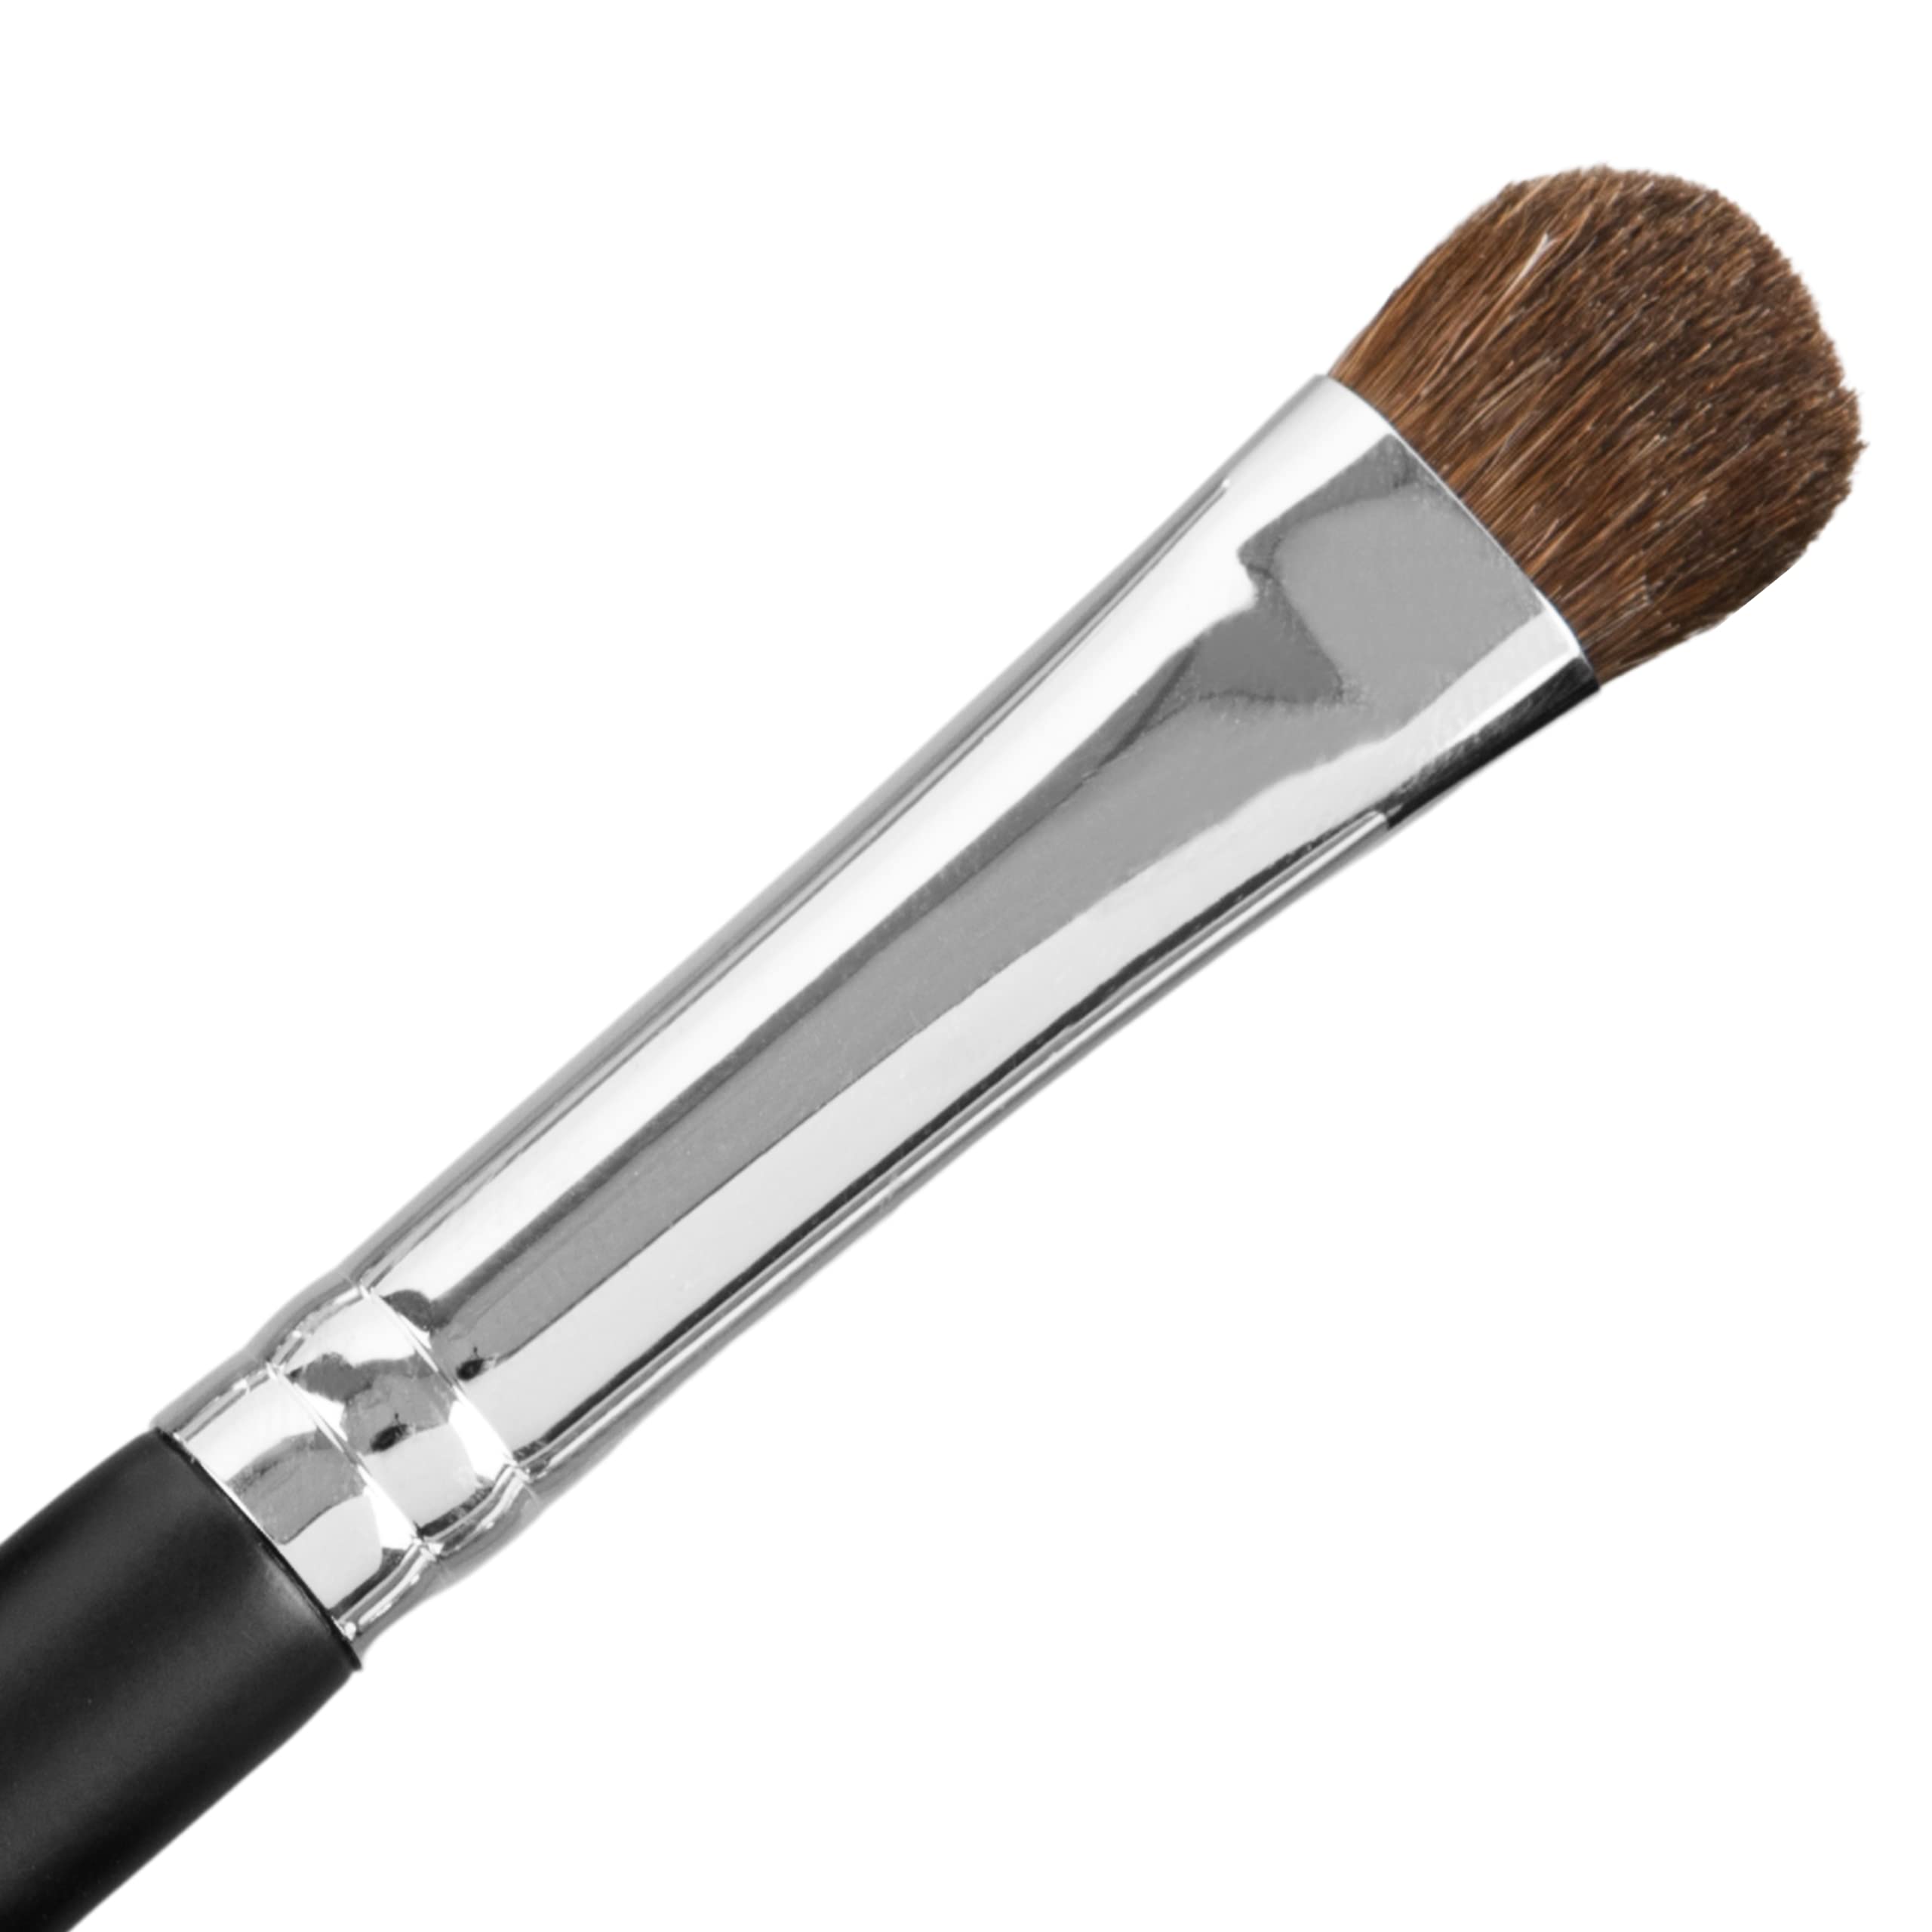 Pro Shader Eyeshadow Brush - Beauty Junkees pro All Over Short Flat Shader Eye Shadow Brush for Lid, Dense Rounded Bristles to Pack and Blend Powder Cream Eye Shadow on Eyelid and Crease